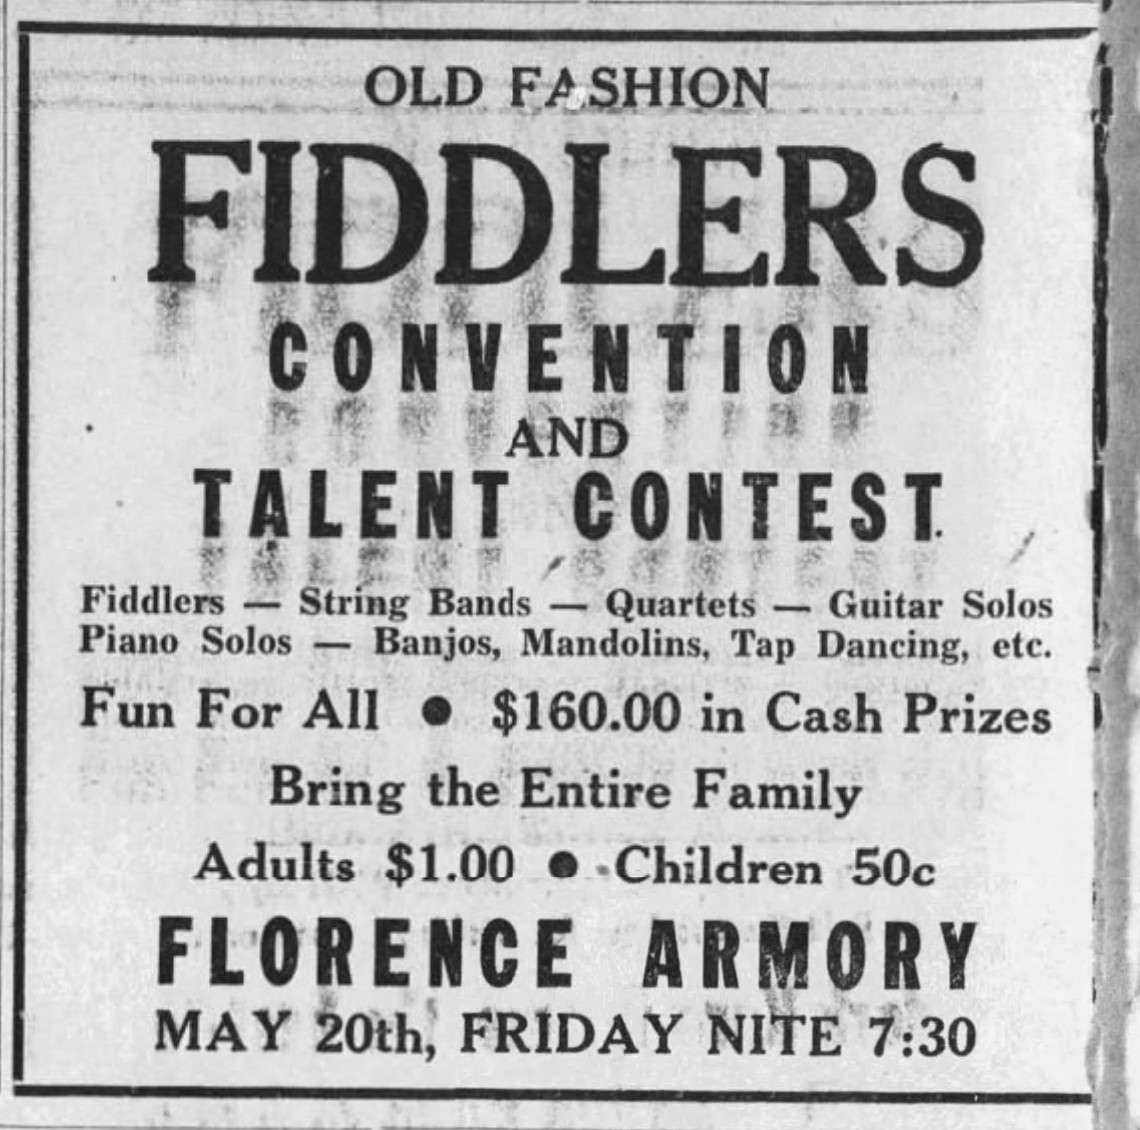 Fiddlers convention at the Florence Armory